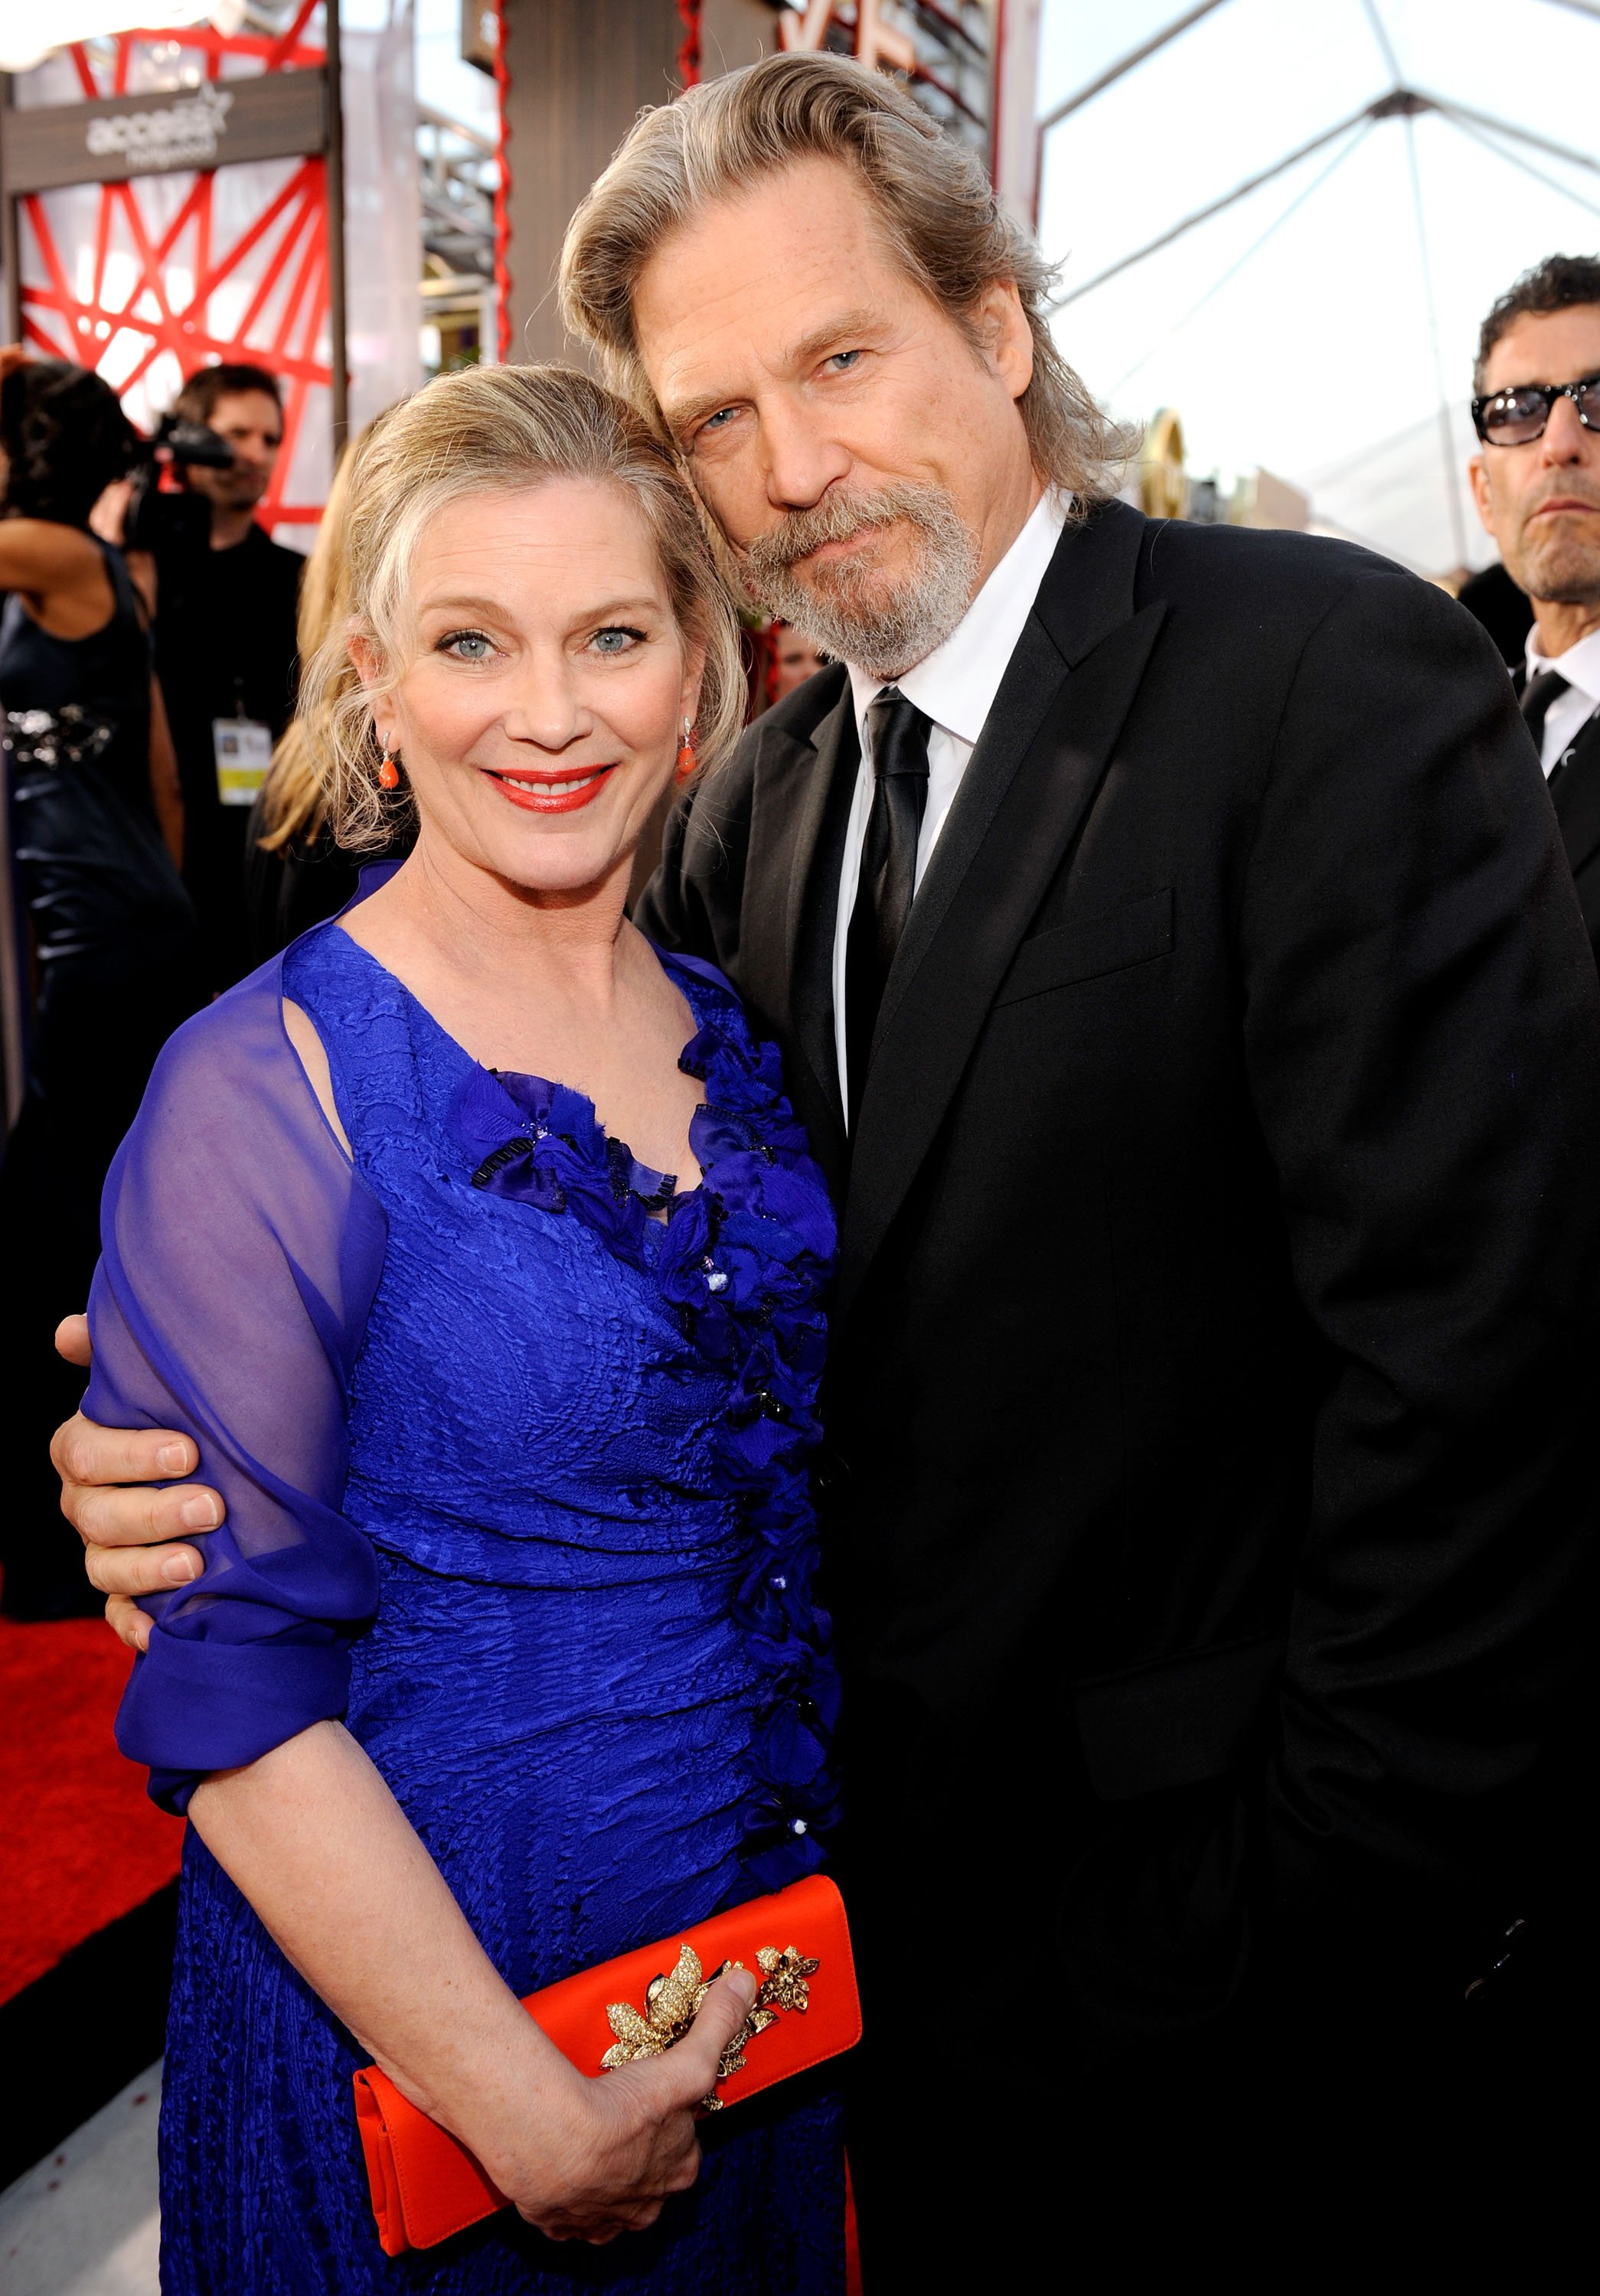 Susan Geston and Jeff Bridges on January 23, 2010 in Los Angeles, California | Source: Getty Images